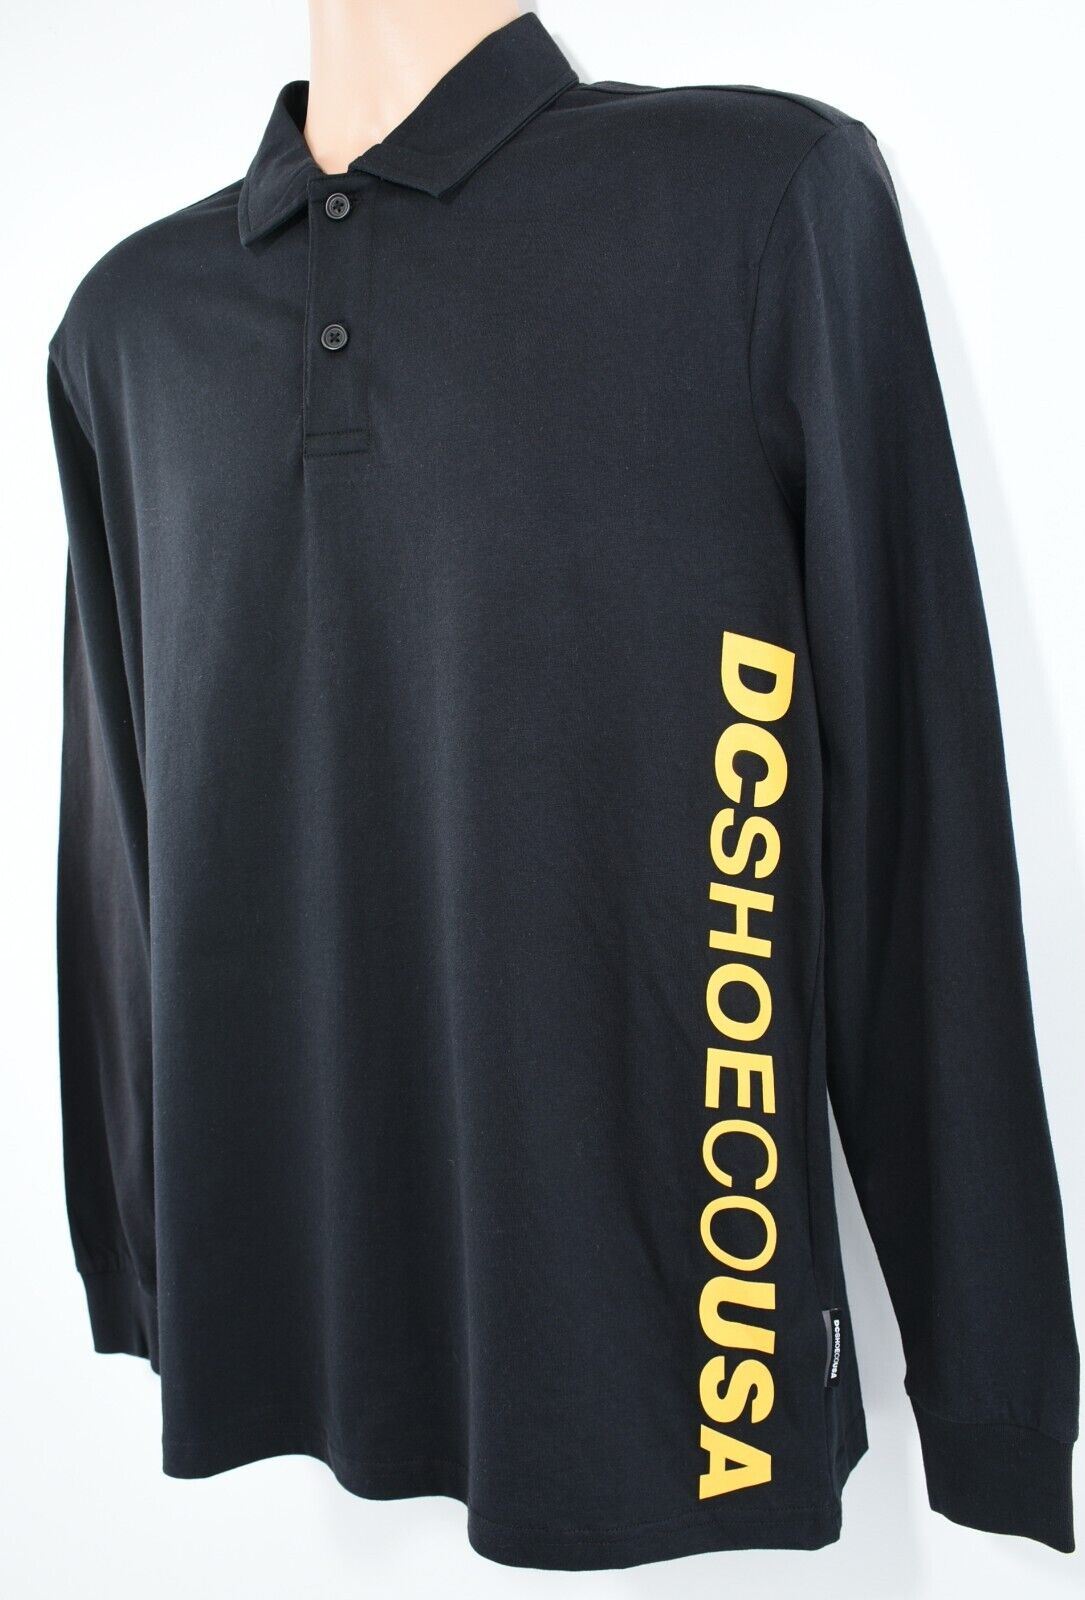 DC SHOES Mens Long Sleeve Polo Shirt Top, Black with Yellow Logo, size SMALL